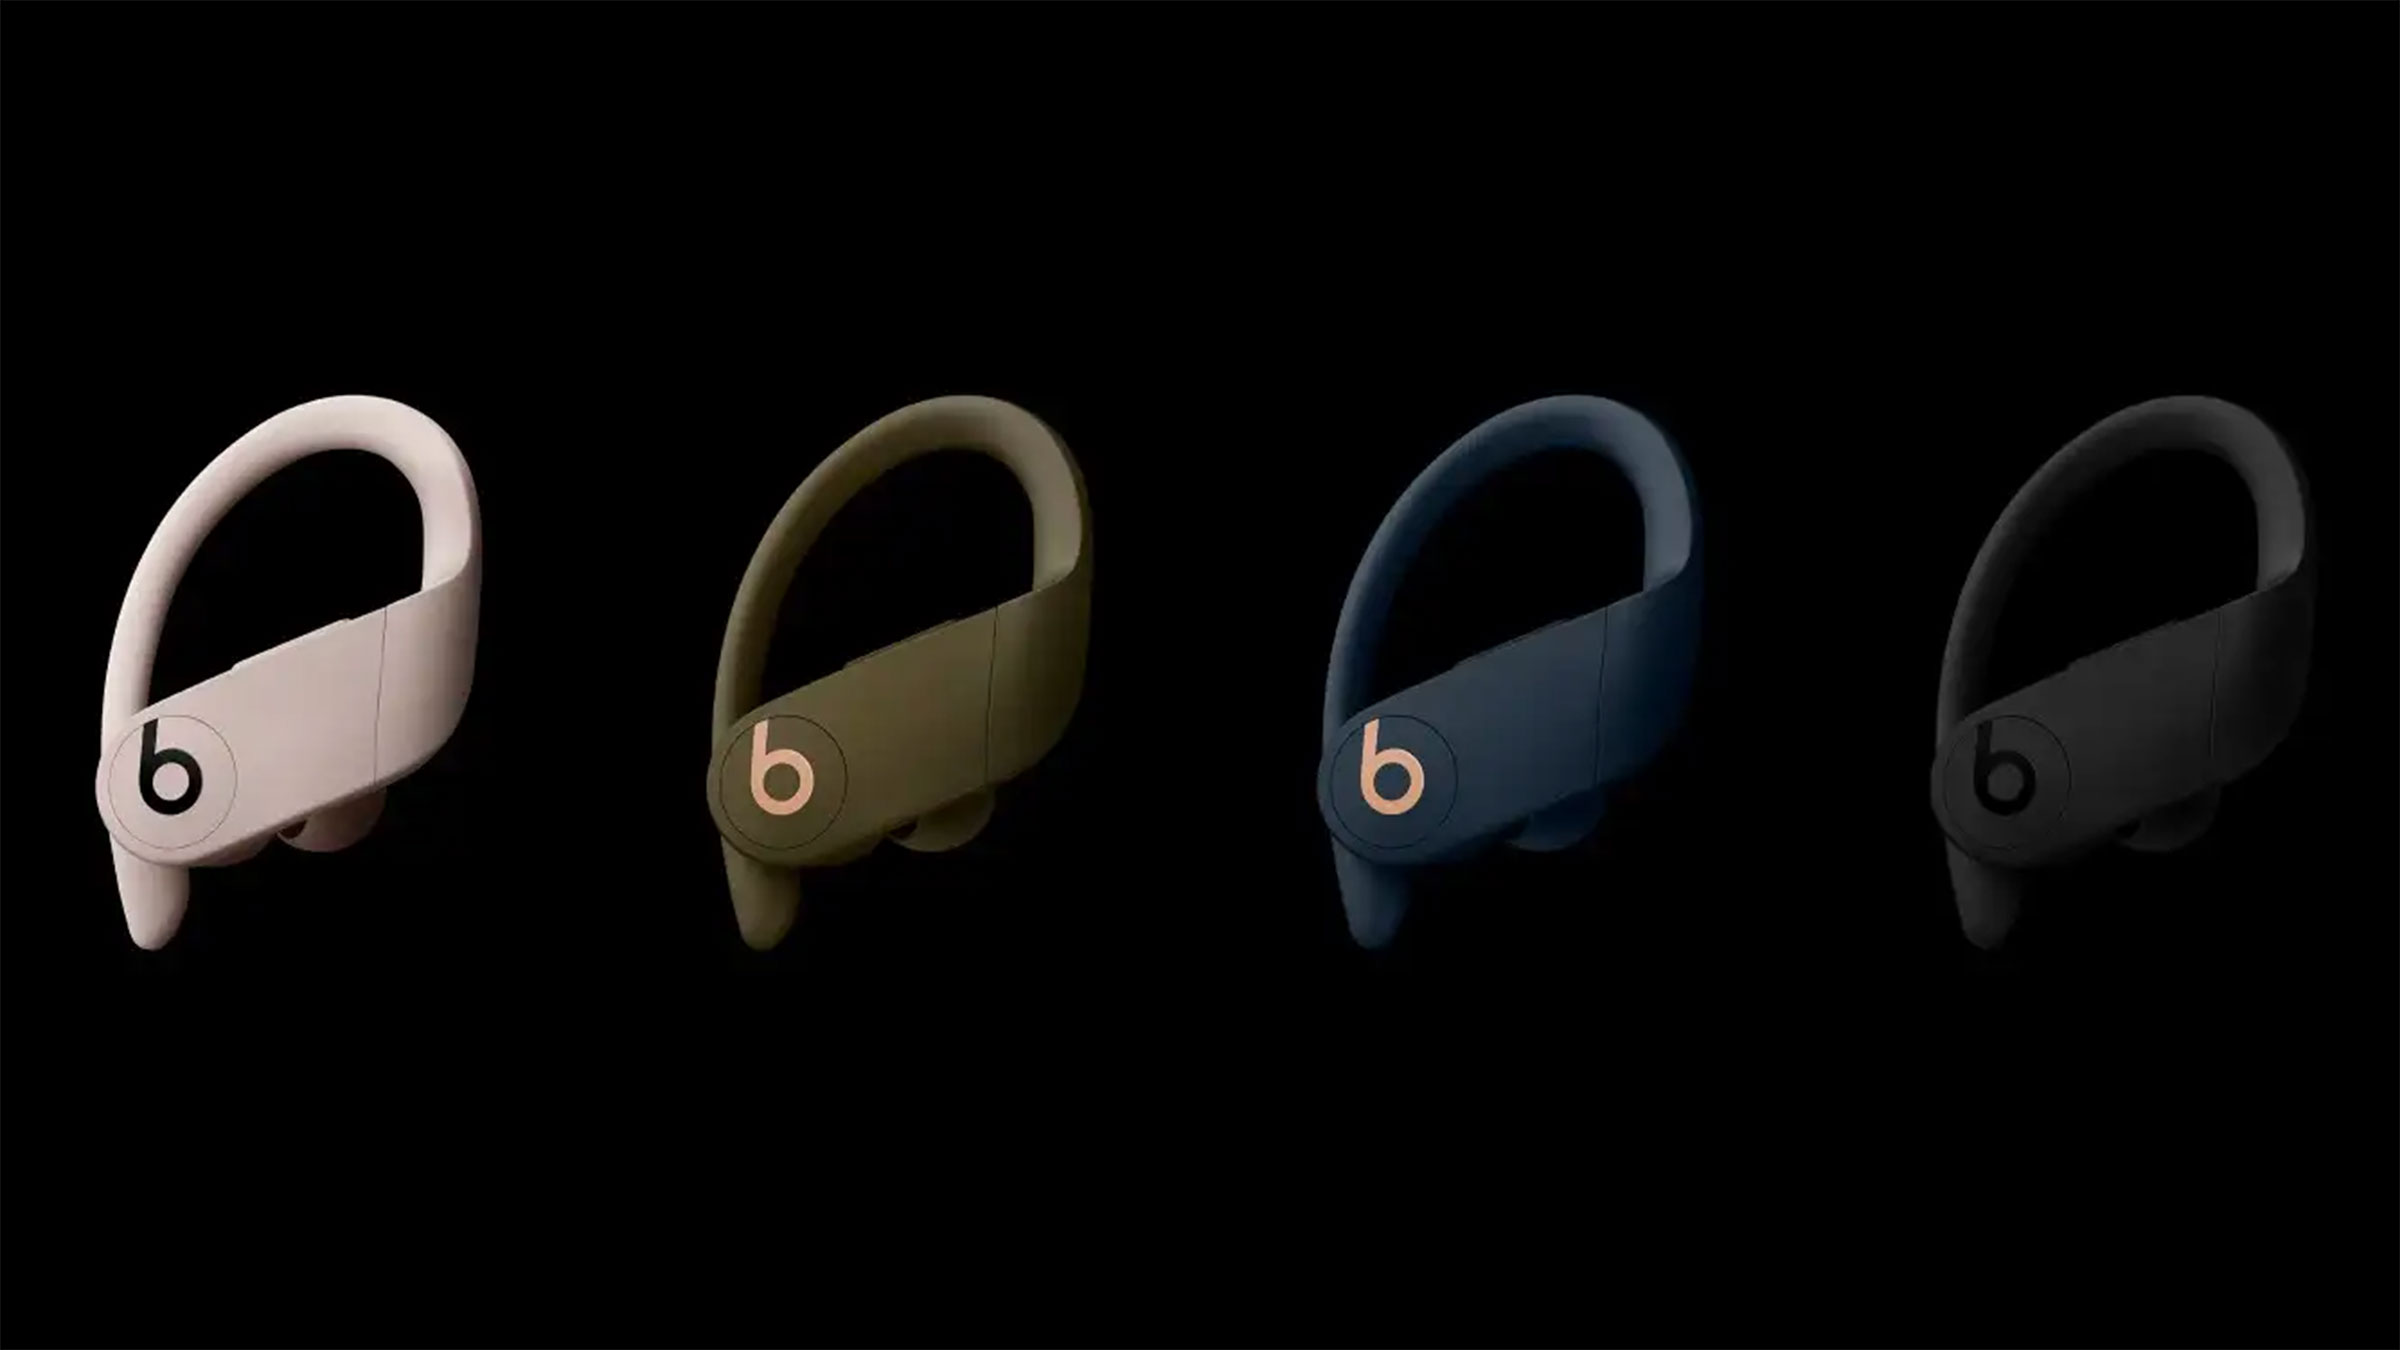 These Apple Beats headphones are perfect for runners, and now with a 100 euro discount